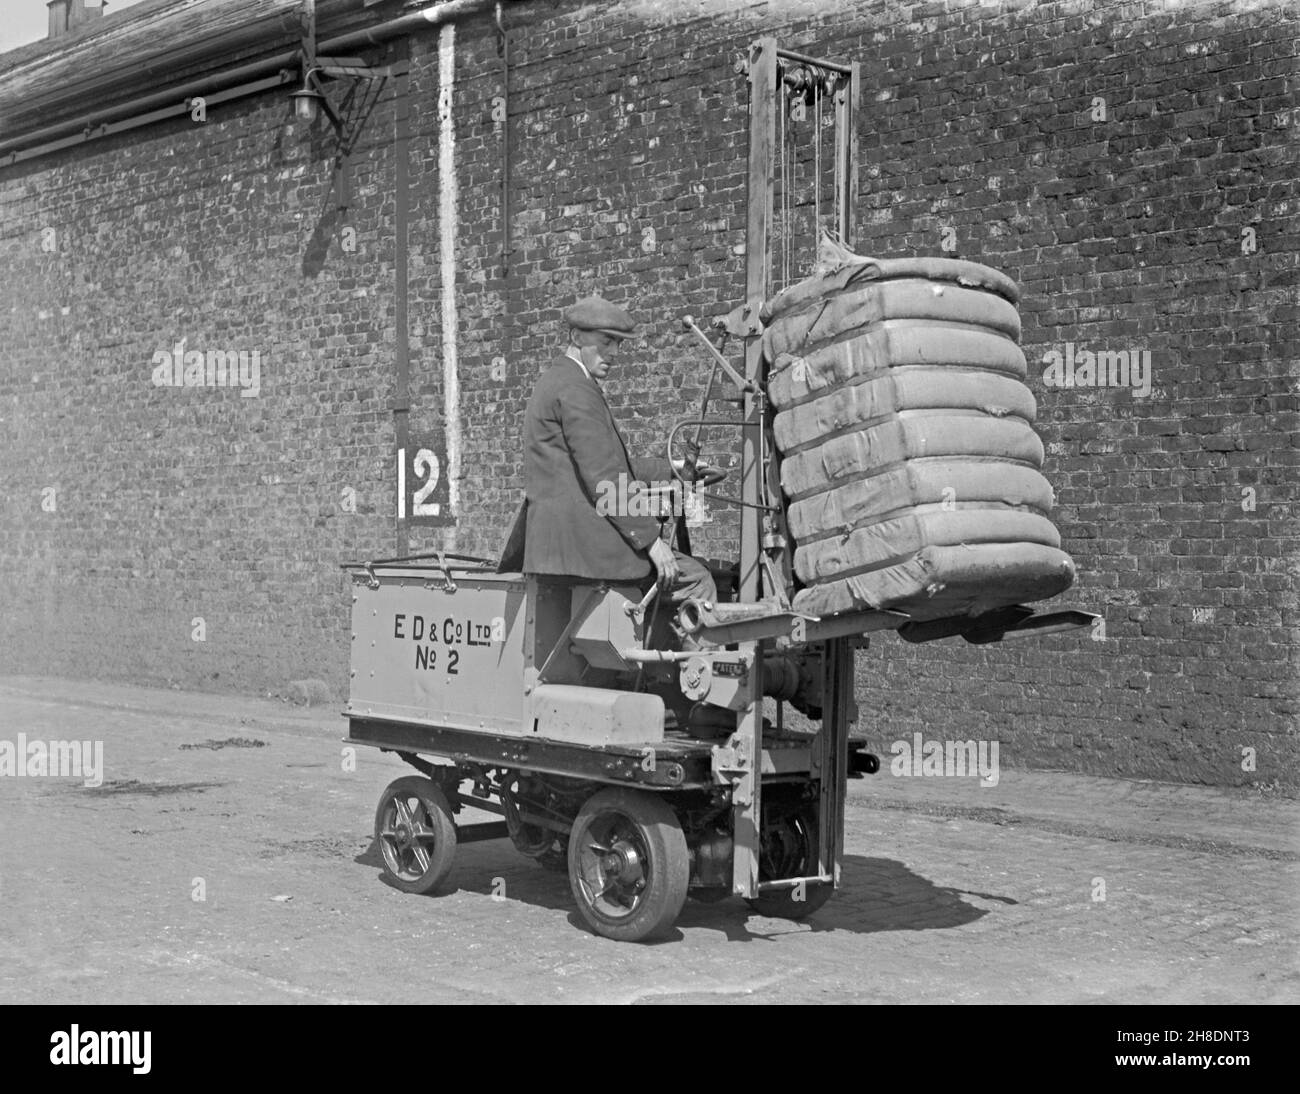 Early battery powered transport – here a forklift truck is being used to transport a heavy bale at E D and Co Ltd, a shipping and warehousing company at Liverpool Docks, Lancashire, England, UK in the early years of the twentieth century. In the early years of motor transport electrically-powered vehicles were a good option compared with petrol driven ones for short-distance commercial transport, such as moving goods around factories. This is taken from an old original glass negative – a vintage 20th century photograph. Stock Photo